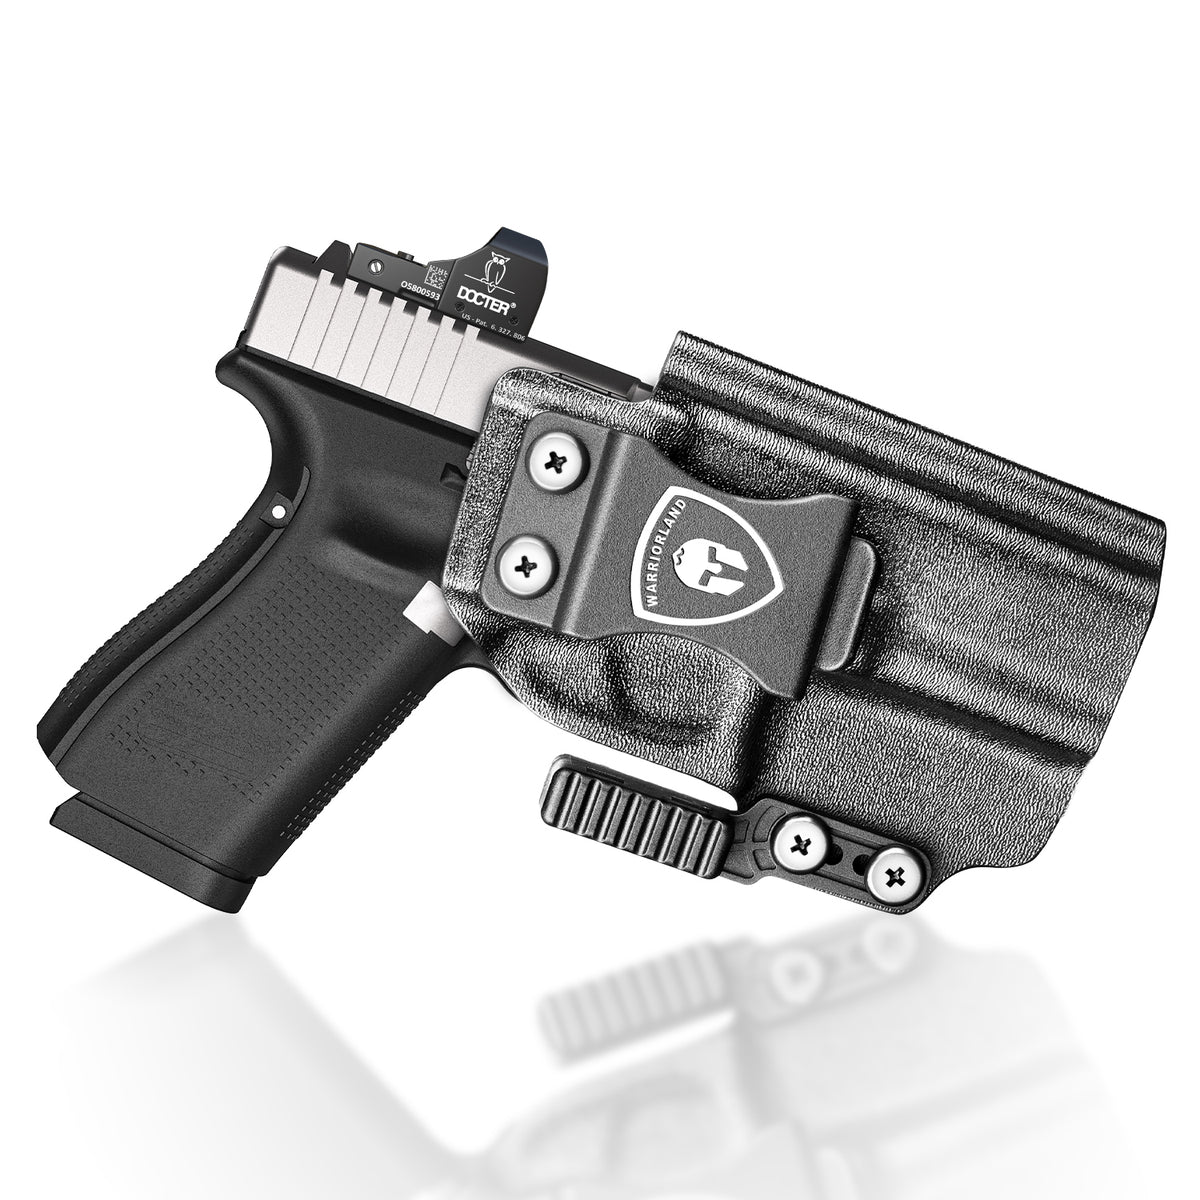 Glock 17 IWB Kydex Holster with Claw Attachment and Optic Cut: Glock 17 Gen 3-5 & Glock 22/31 Gen 3-4, Inside Waistband Appendix Carry G17 Holster, Adj. Cant & Retention, Right Hand|WARRIORLAND